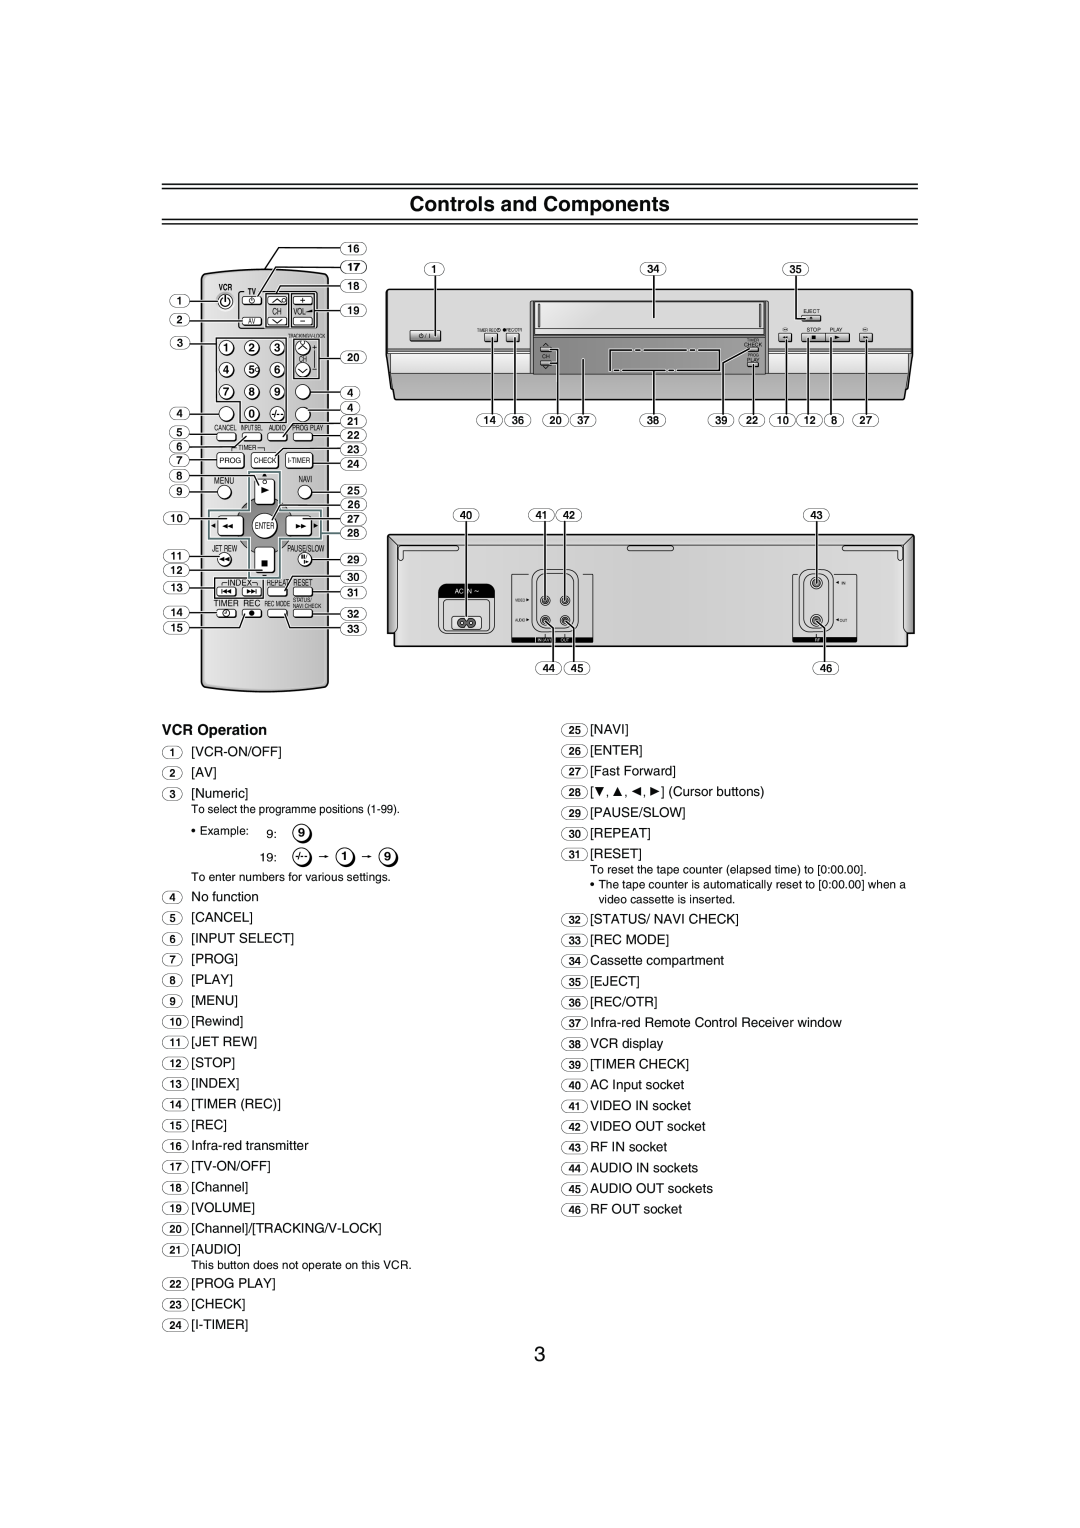 Panasonic NV-MV21 Series specifications Controls and Components, VCR Operation 